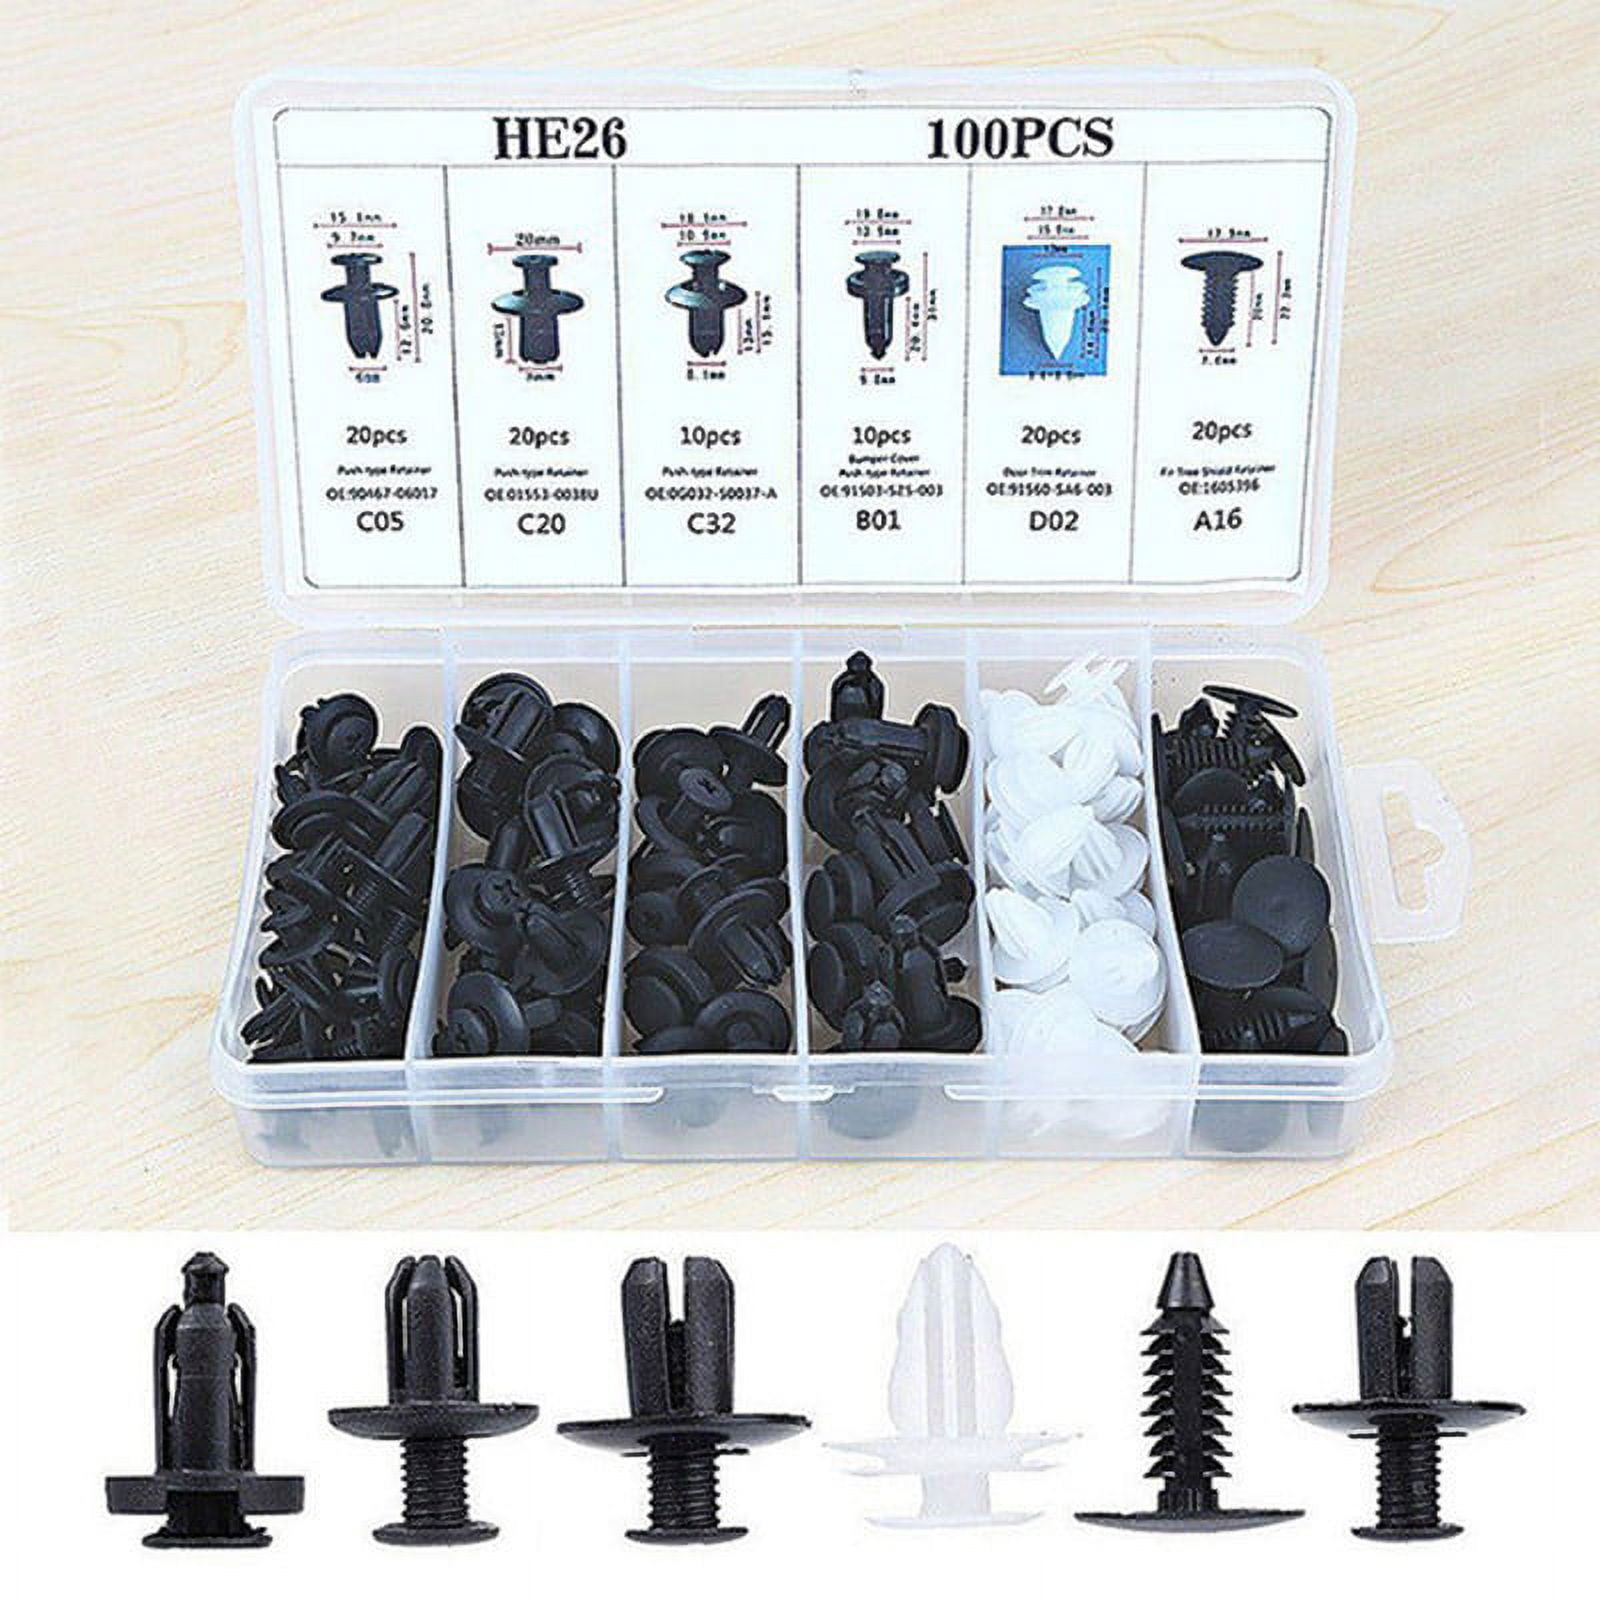 75PCS Snap Fastener Stainless Canvas Caps Screw Kit For Tent Boat Marine